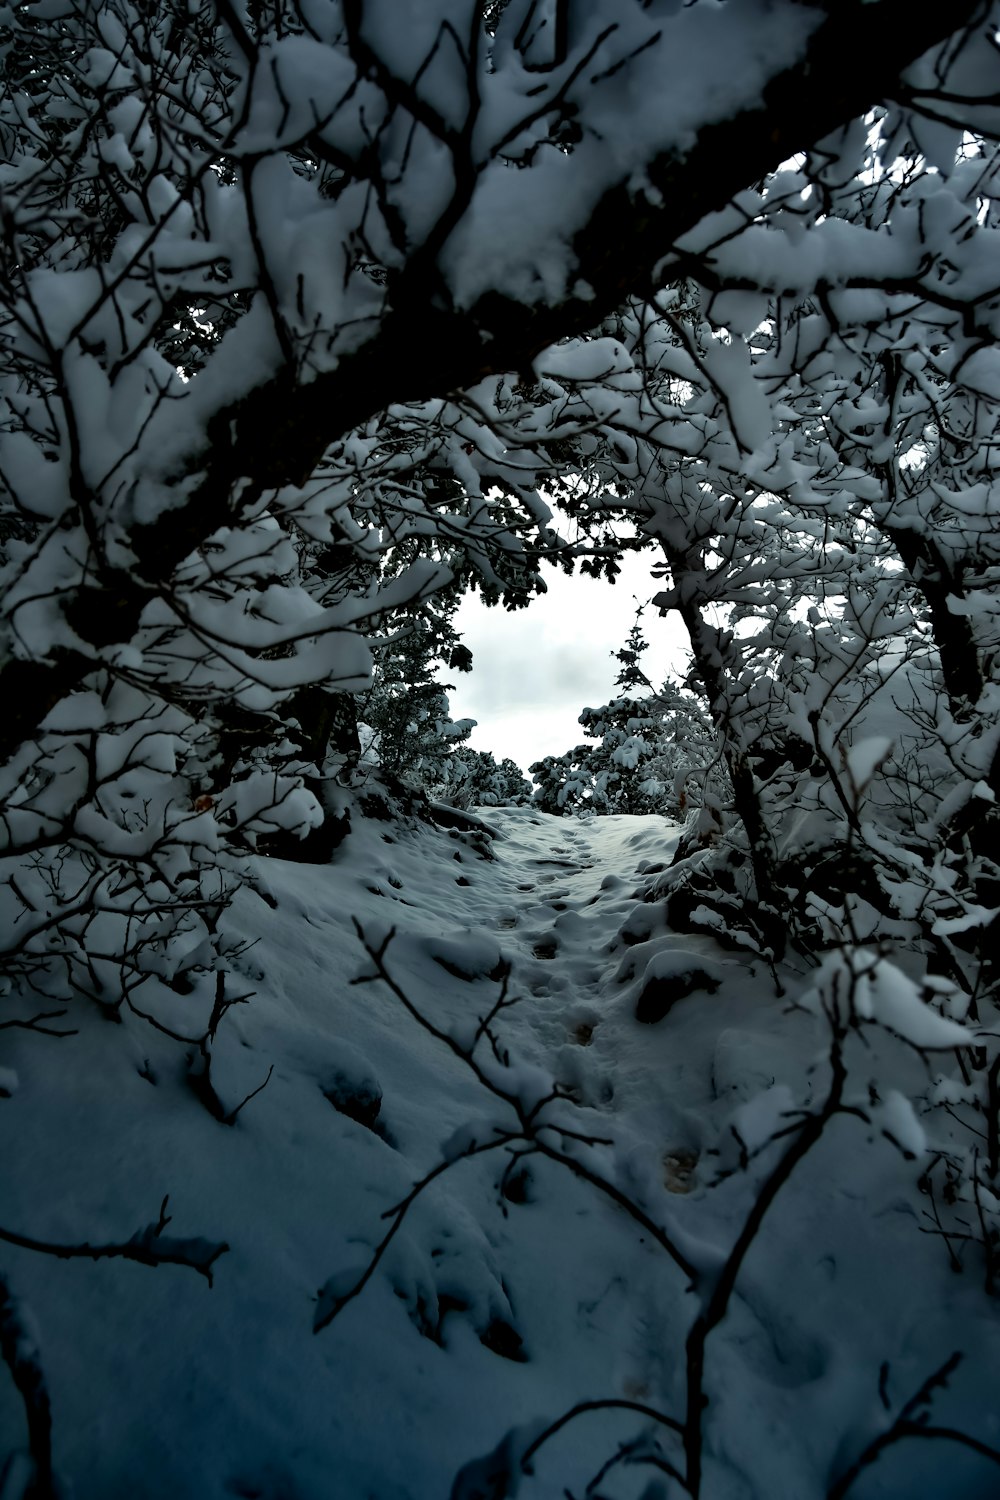 a view of a snowy path through some trees